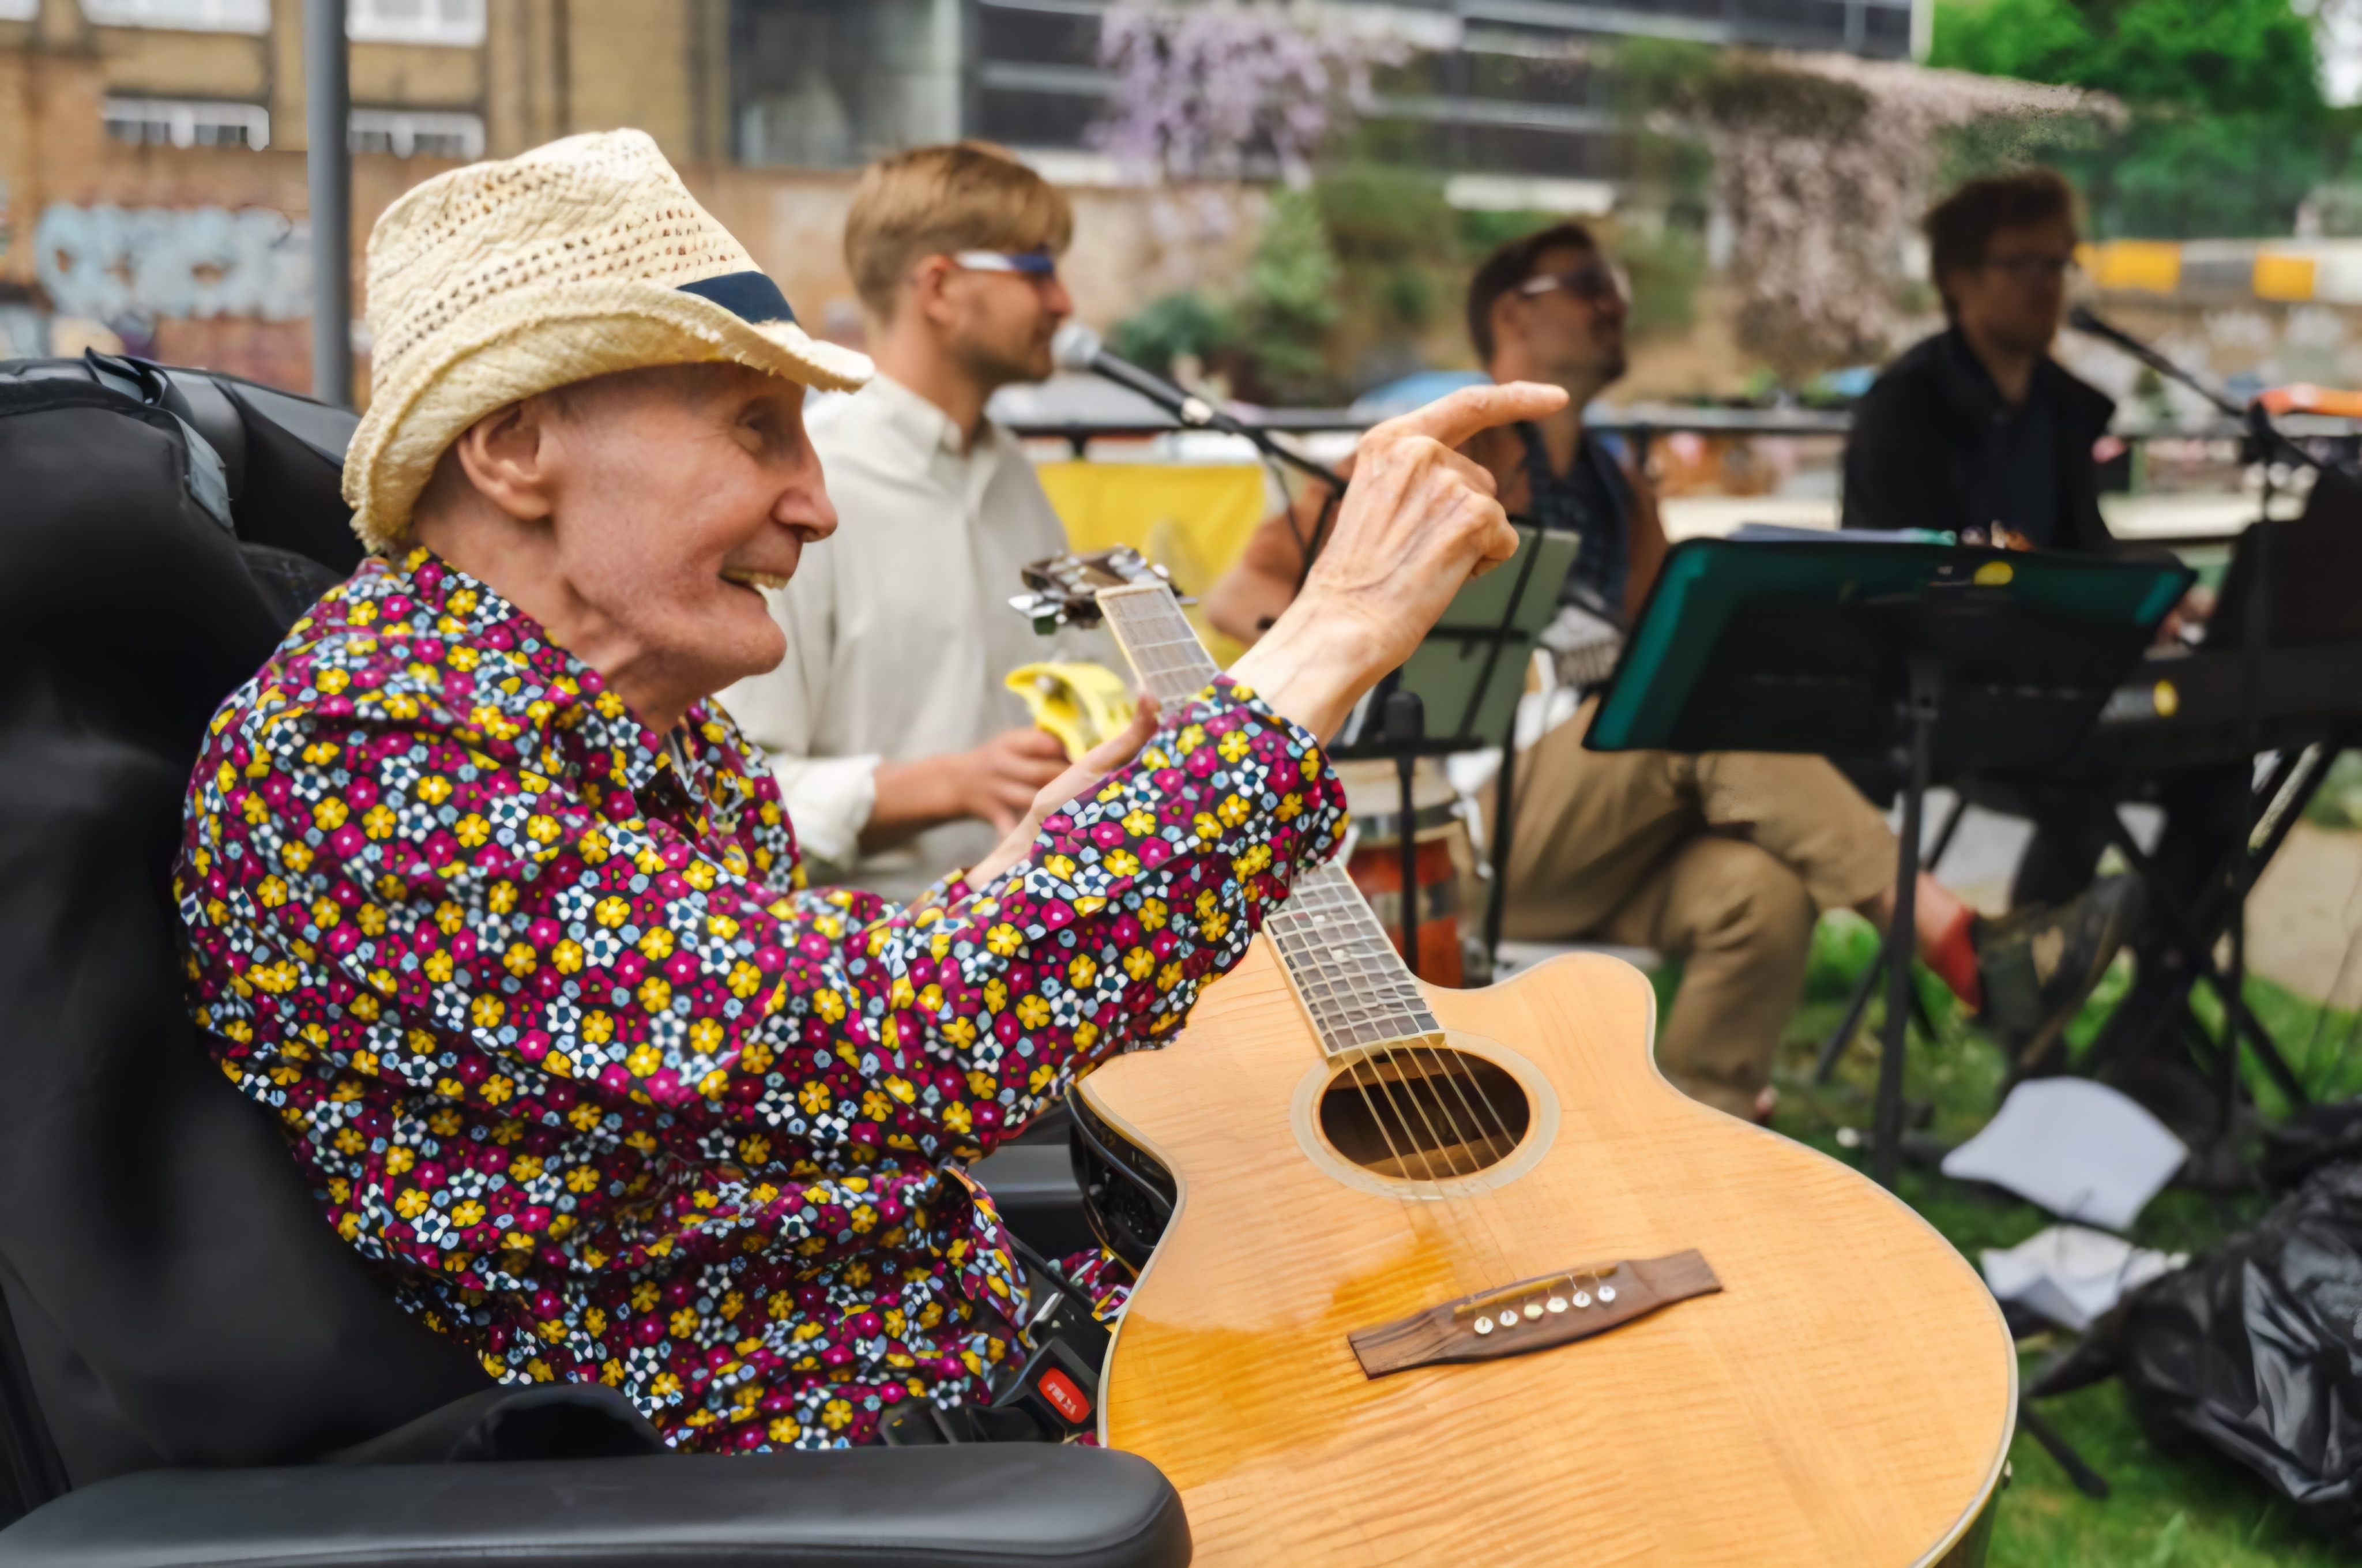 Dementia patient John, 84, is an enthusiastic regular at group music sessions at his care home in London, having learned to play the guitar after receiving music therapy. For some people with dementia, music therapy has been shown improve their thinking, feeling, perception, mood and behaviour. Photo: The Spitz Charitable Trust